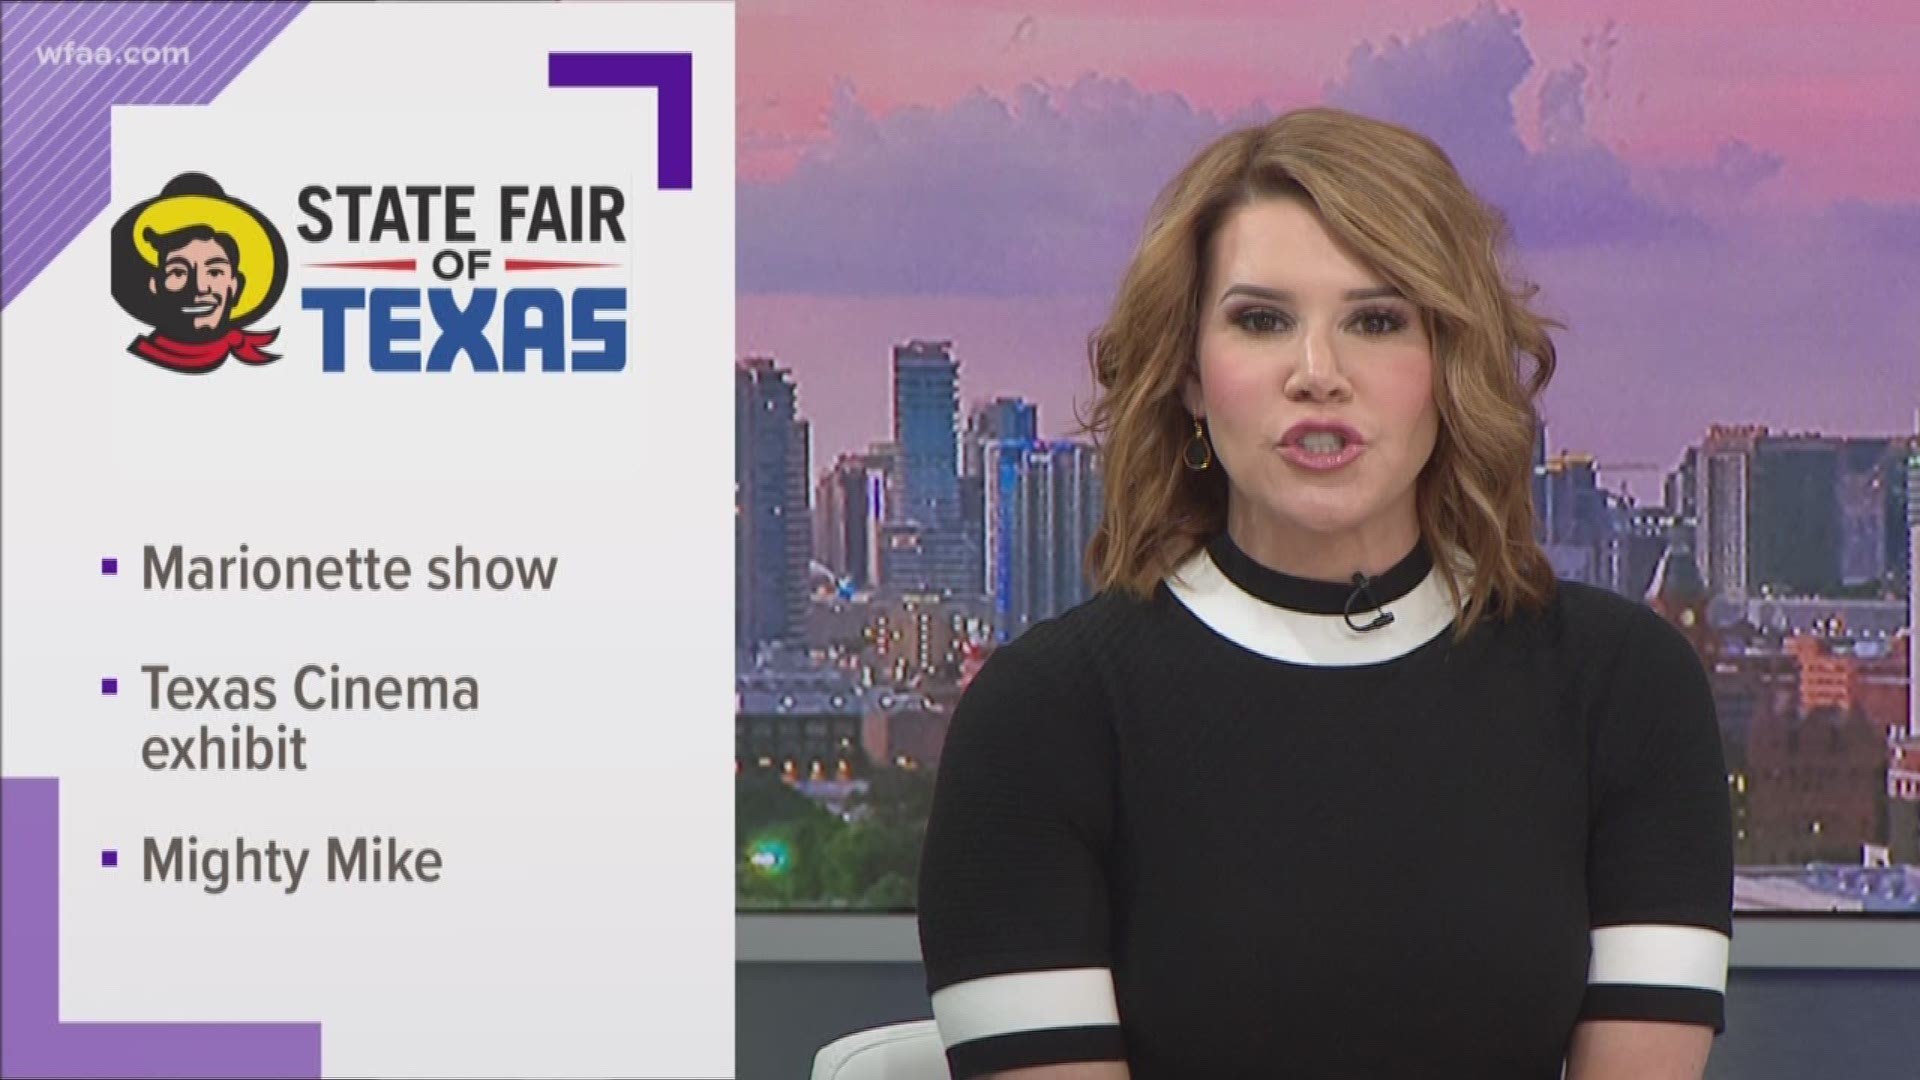 What's new at State Fair of Texas 2019